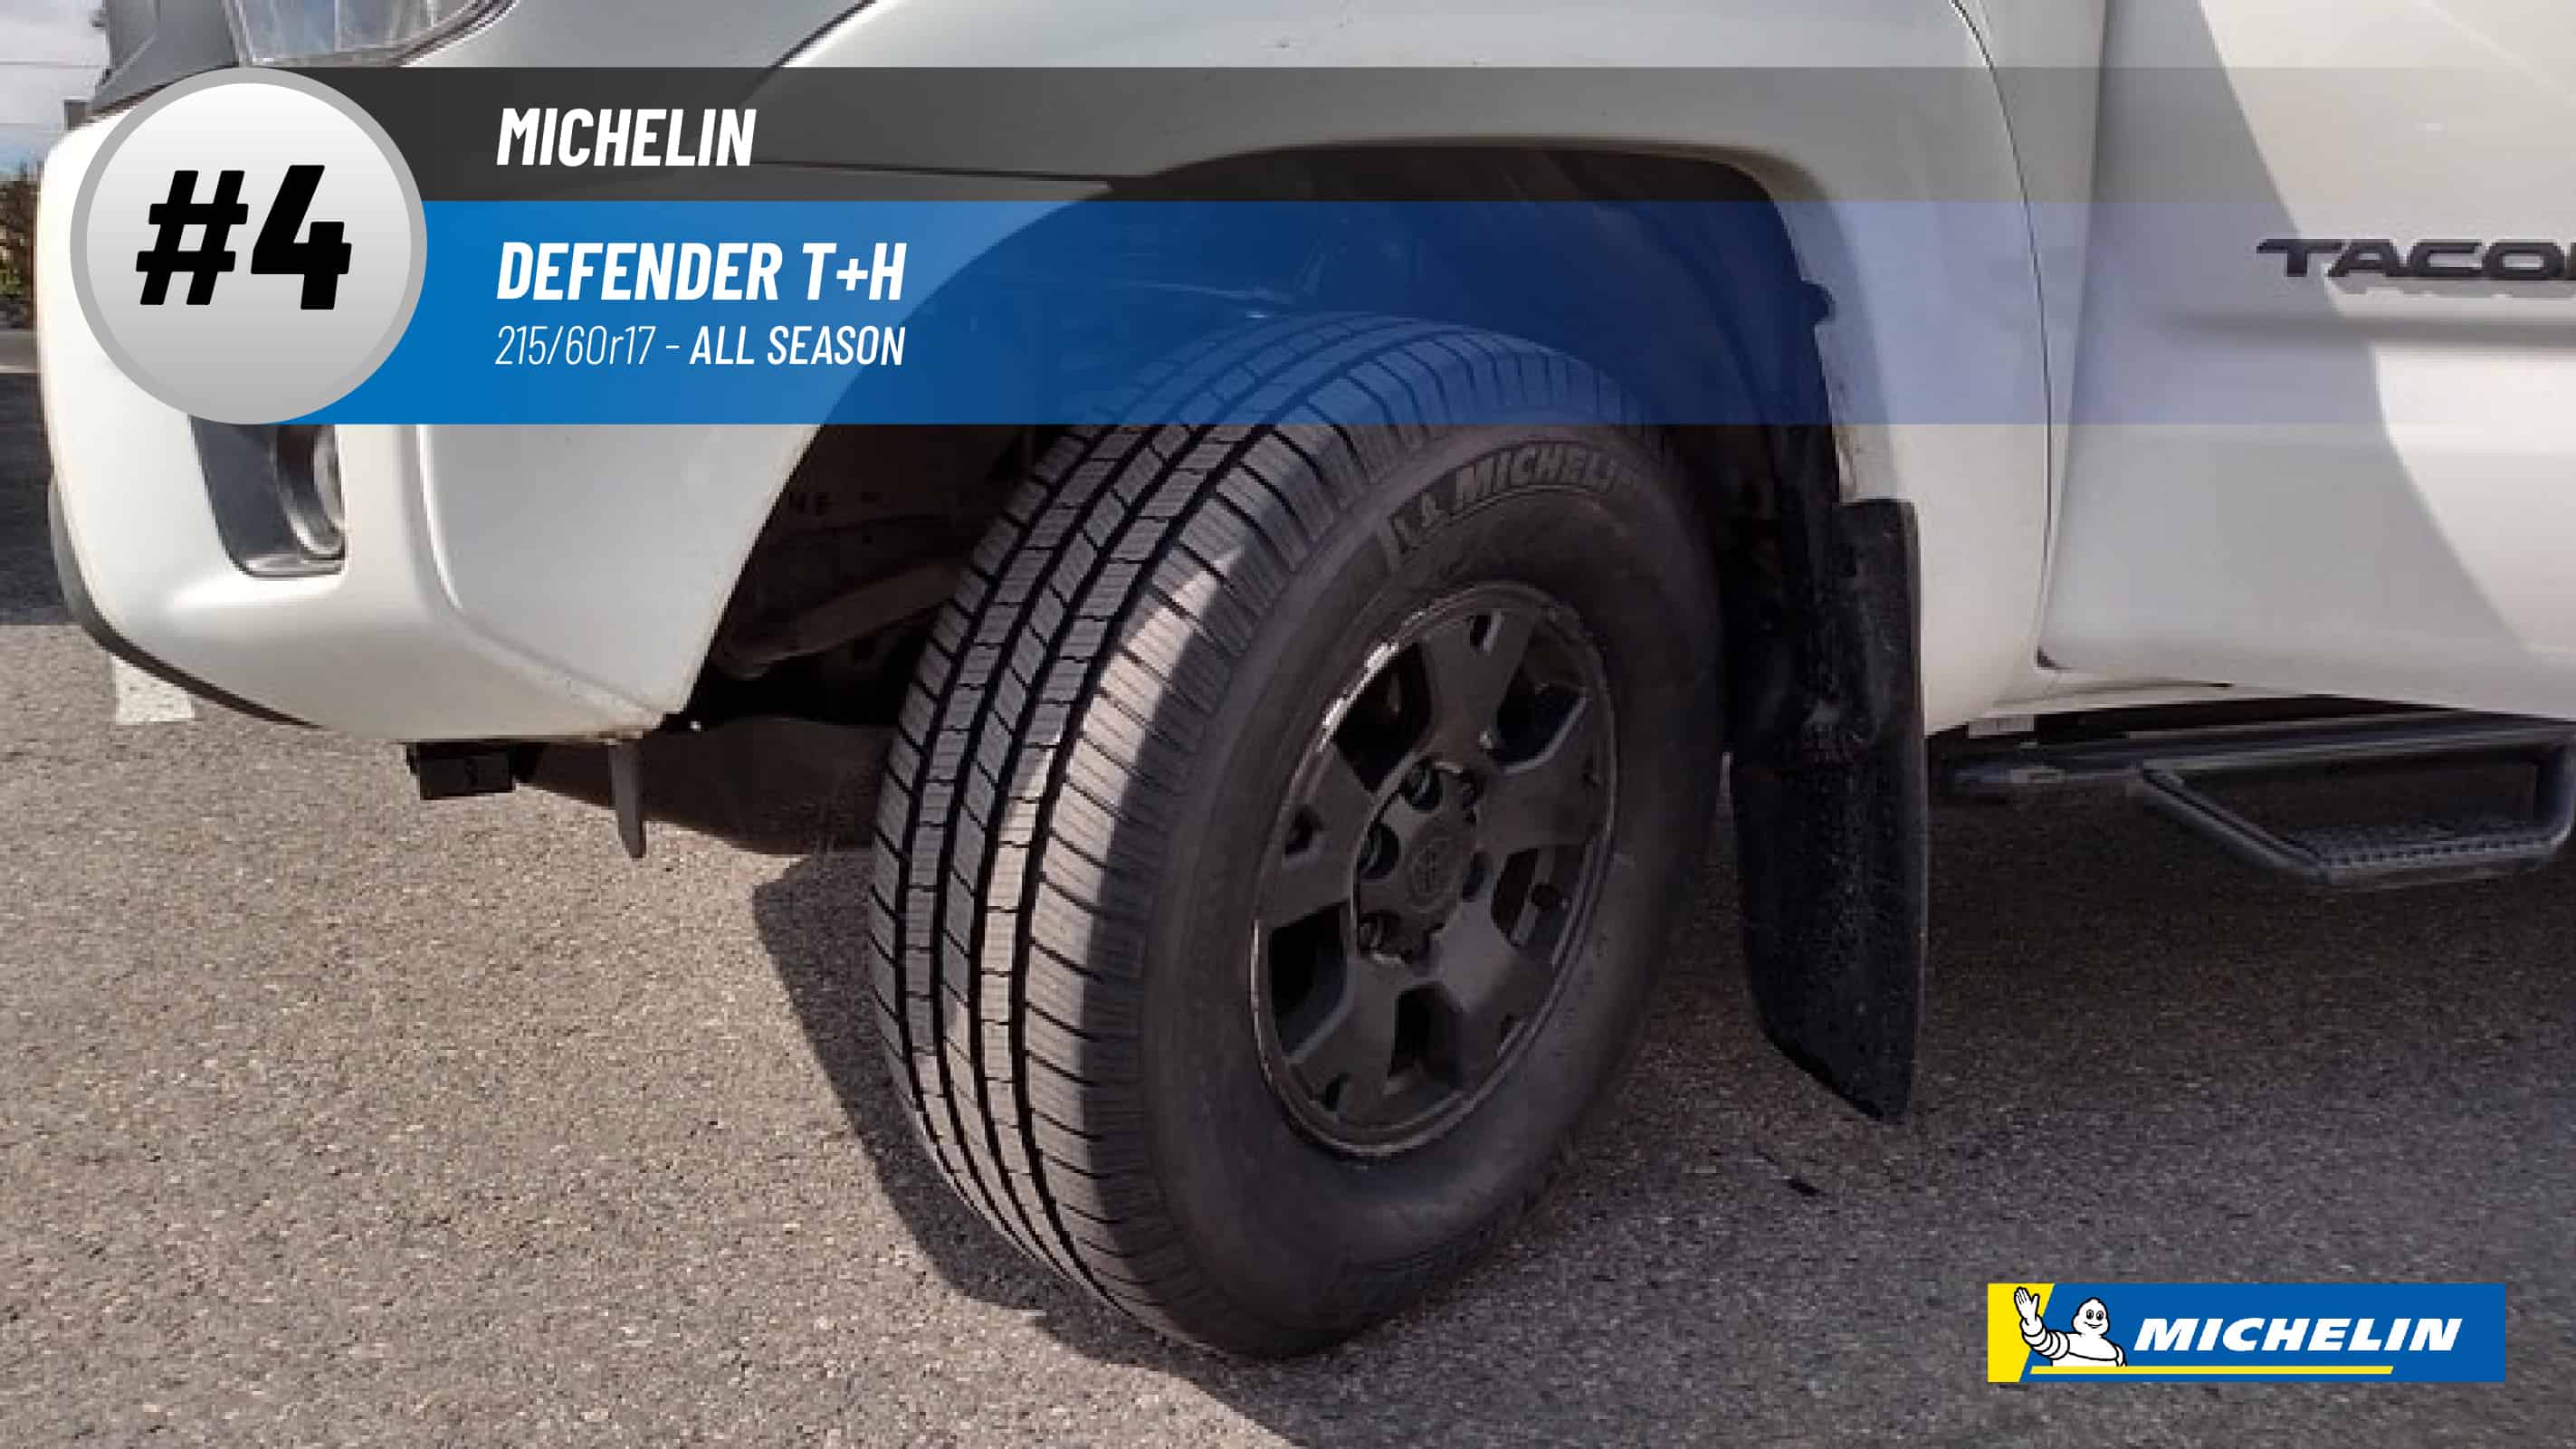 Top #4 All Season Tires: Michelin Defender T+H – best 215/60r17